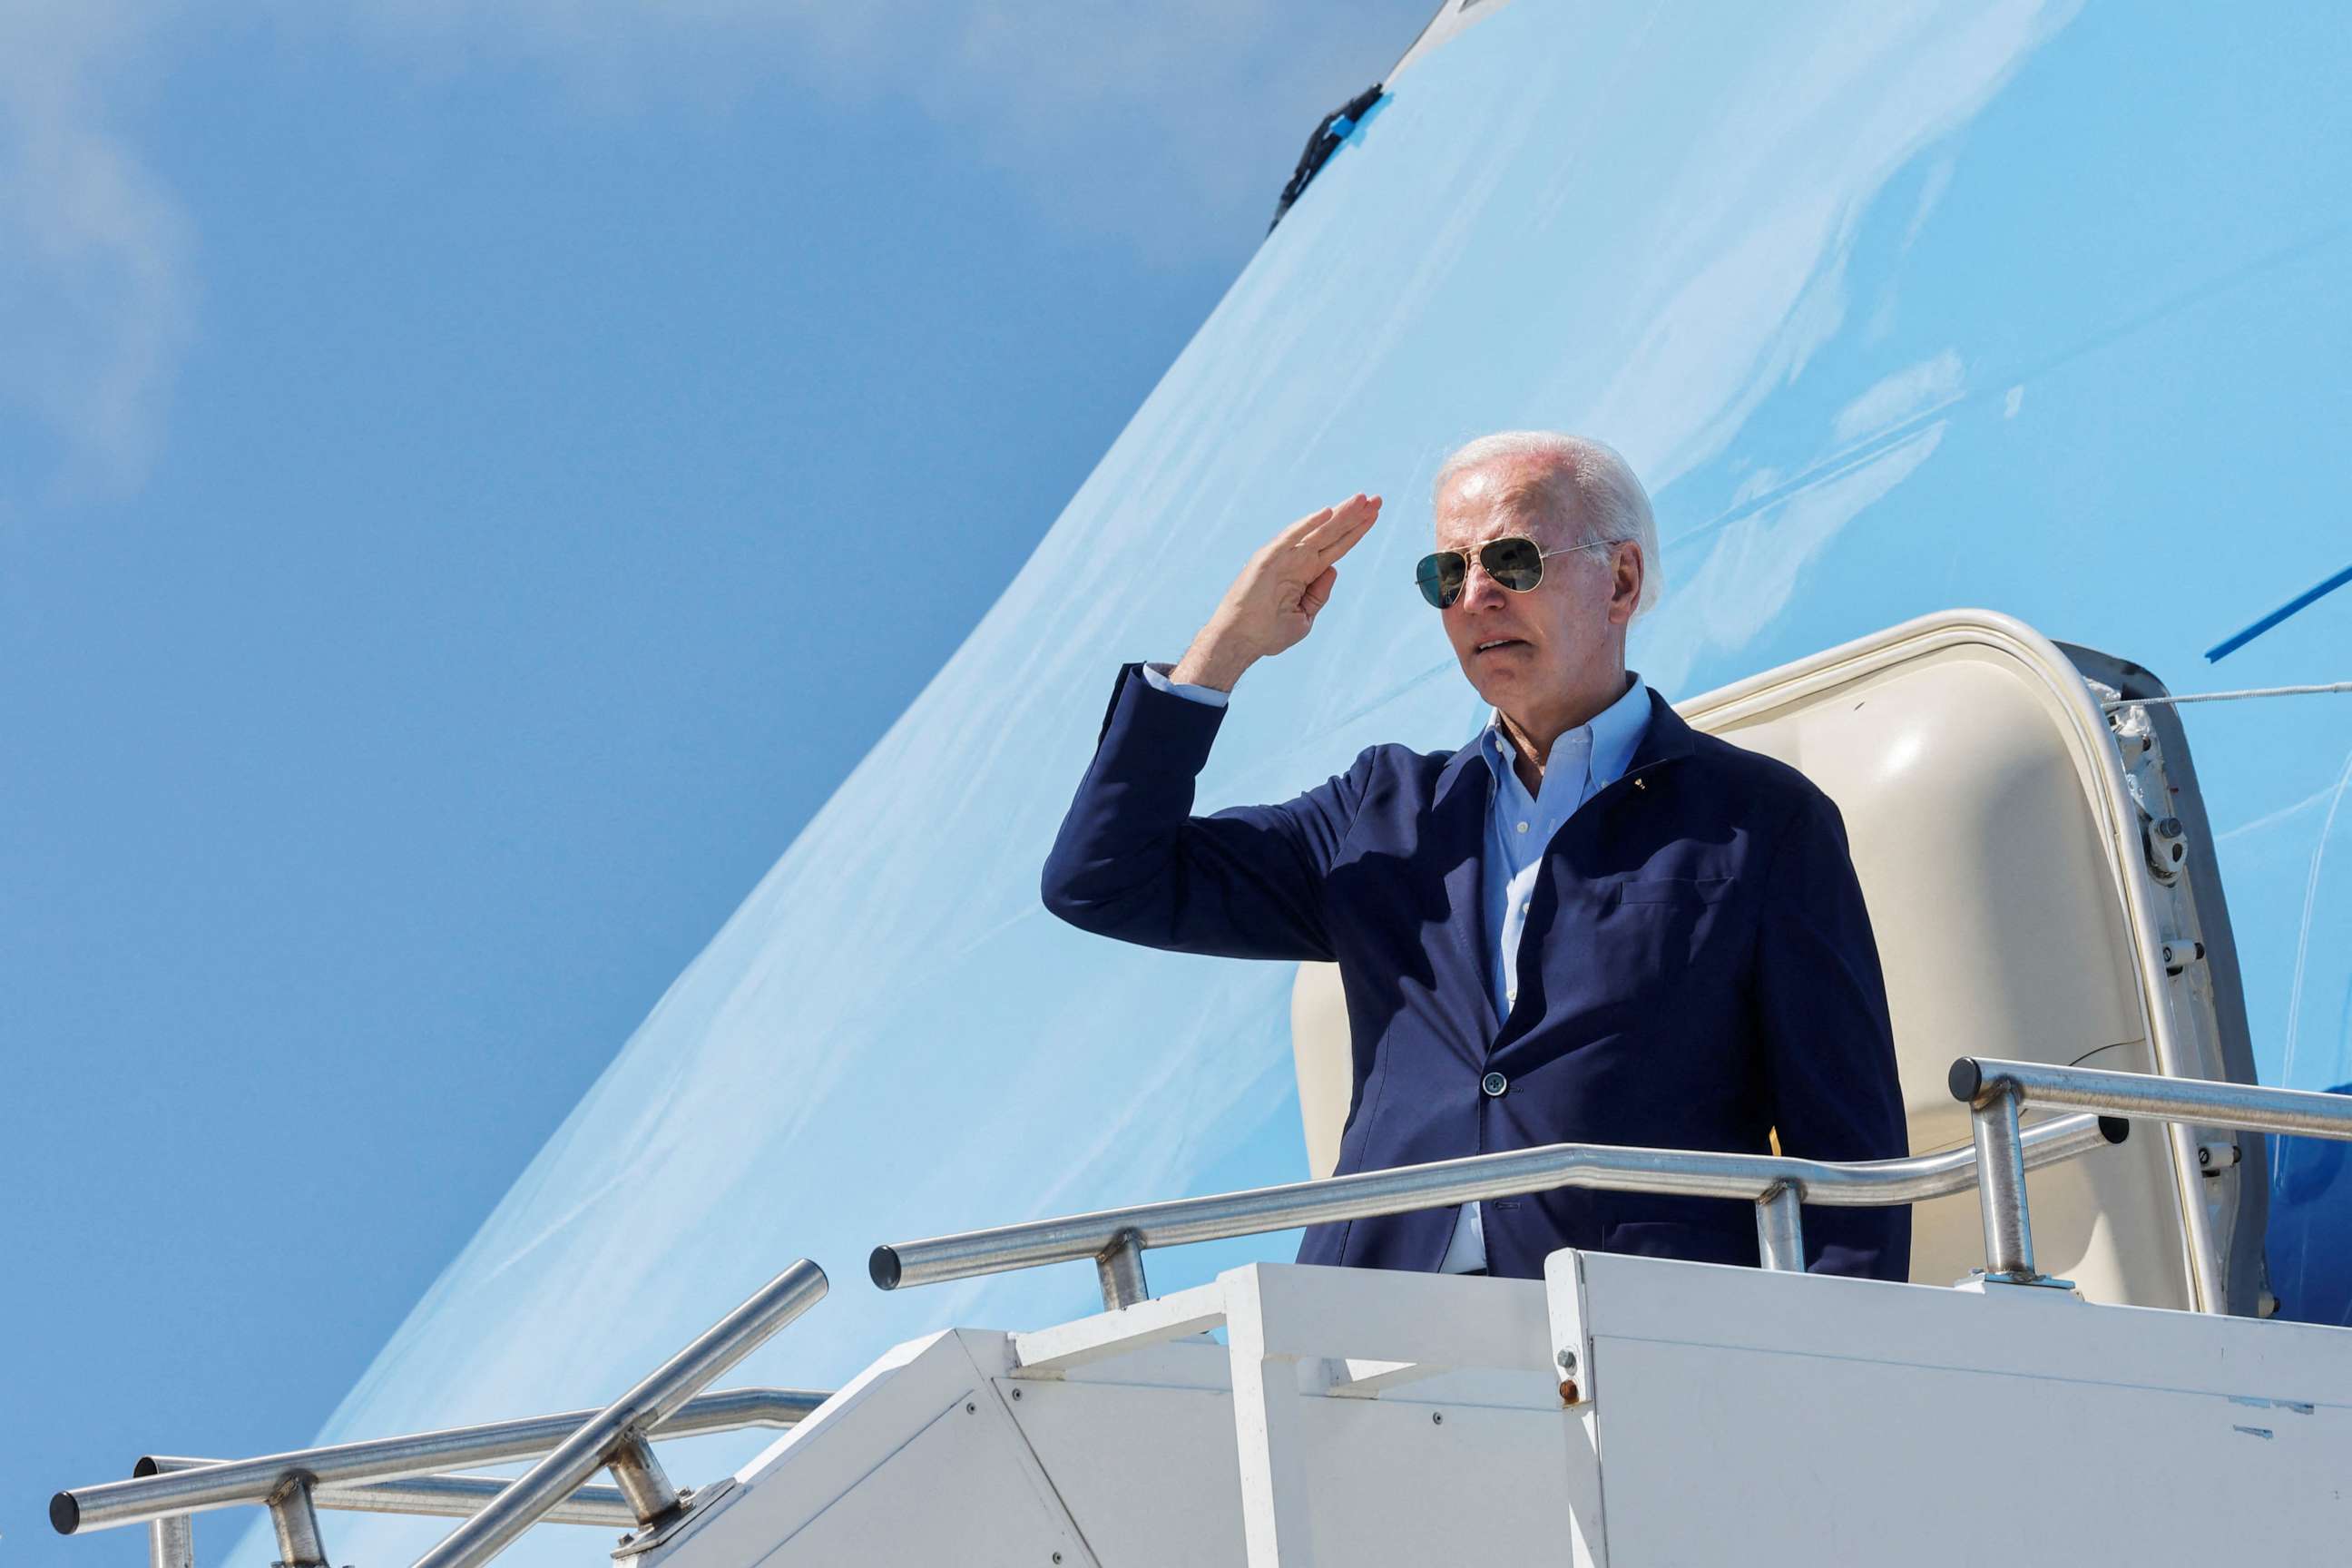 PHOTO: President Joe Biden boards Air Force One at Rohlsen Airport as he departs following a New Year holiday visit to Christiansted, St. Croix, U.S. Virgin Islands, Jan. 2, 2023.